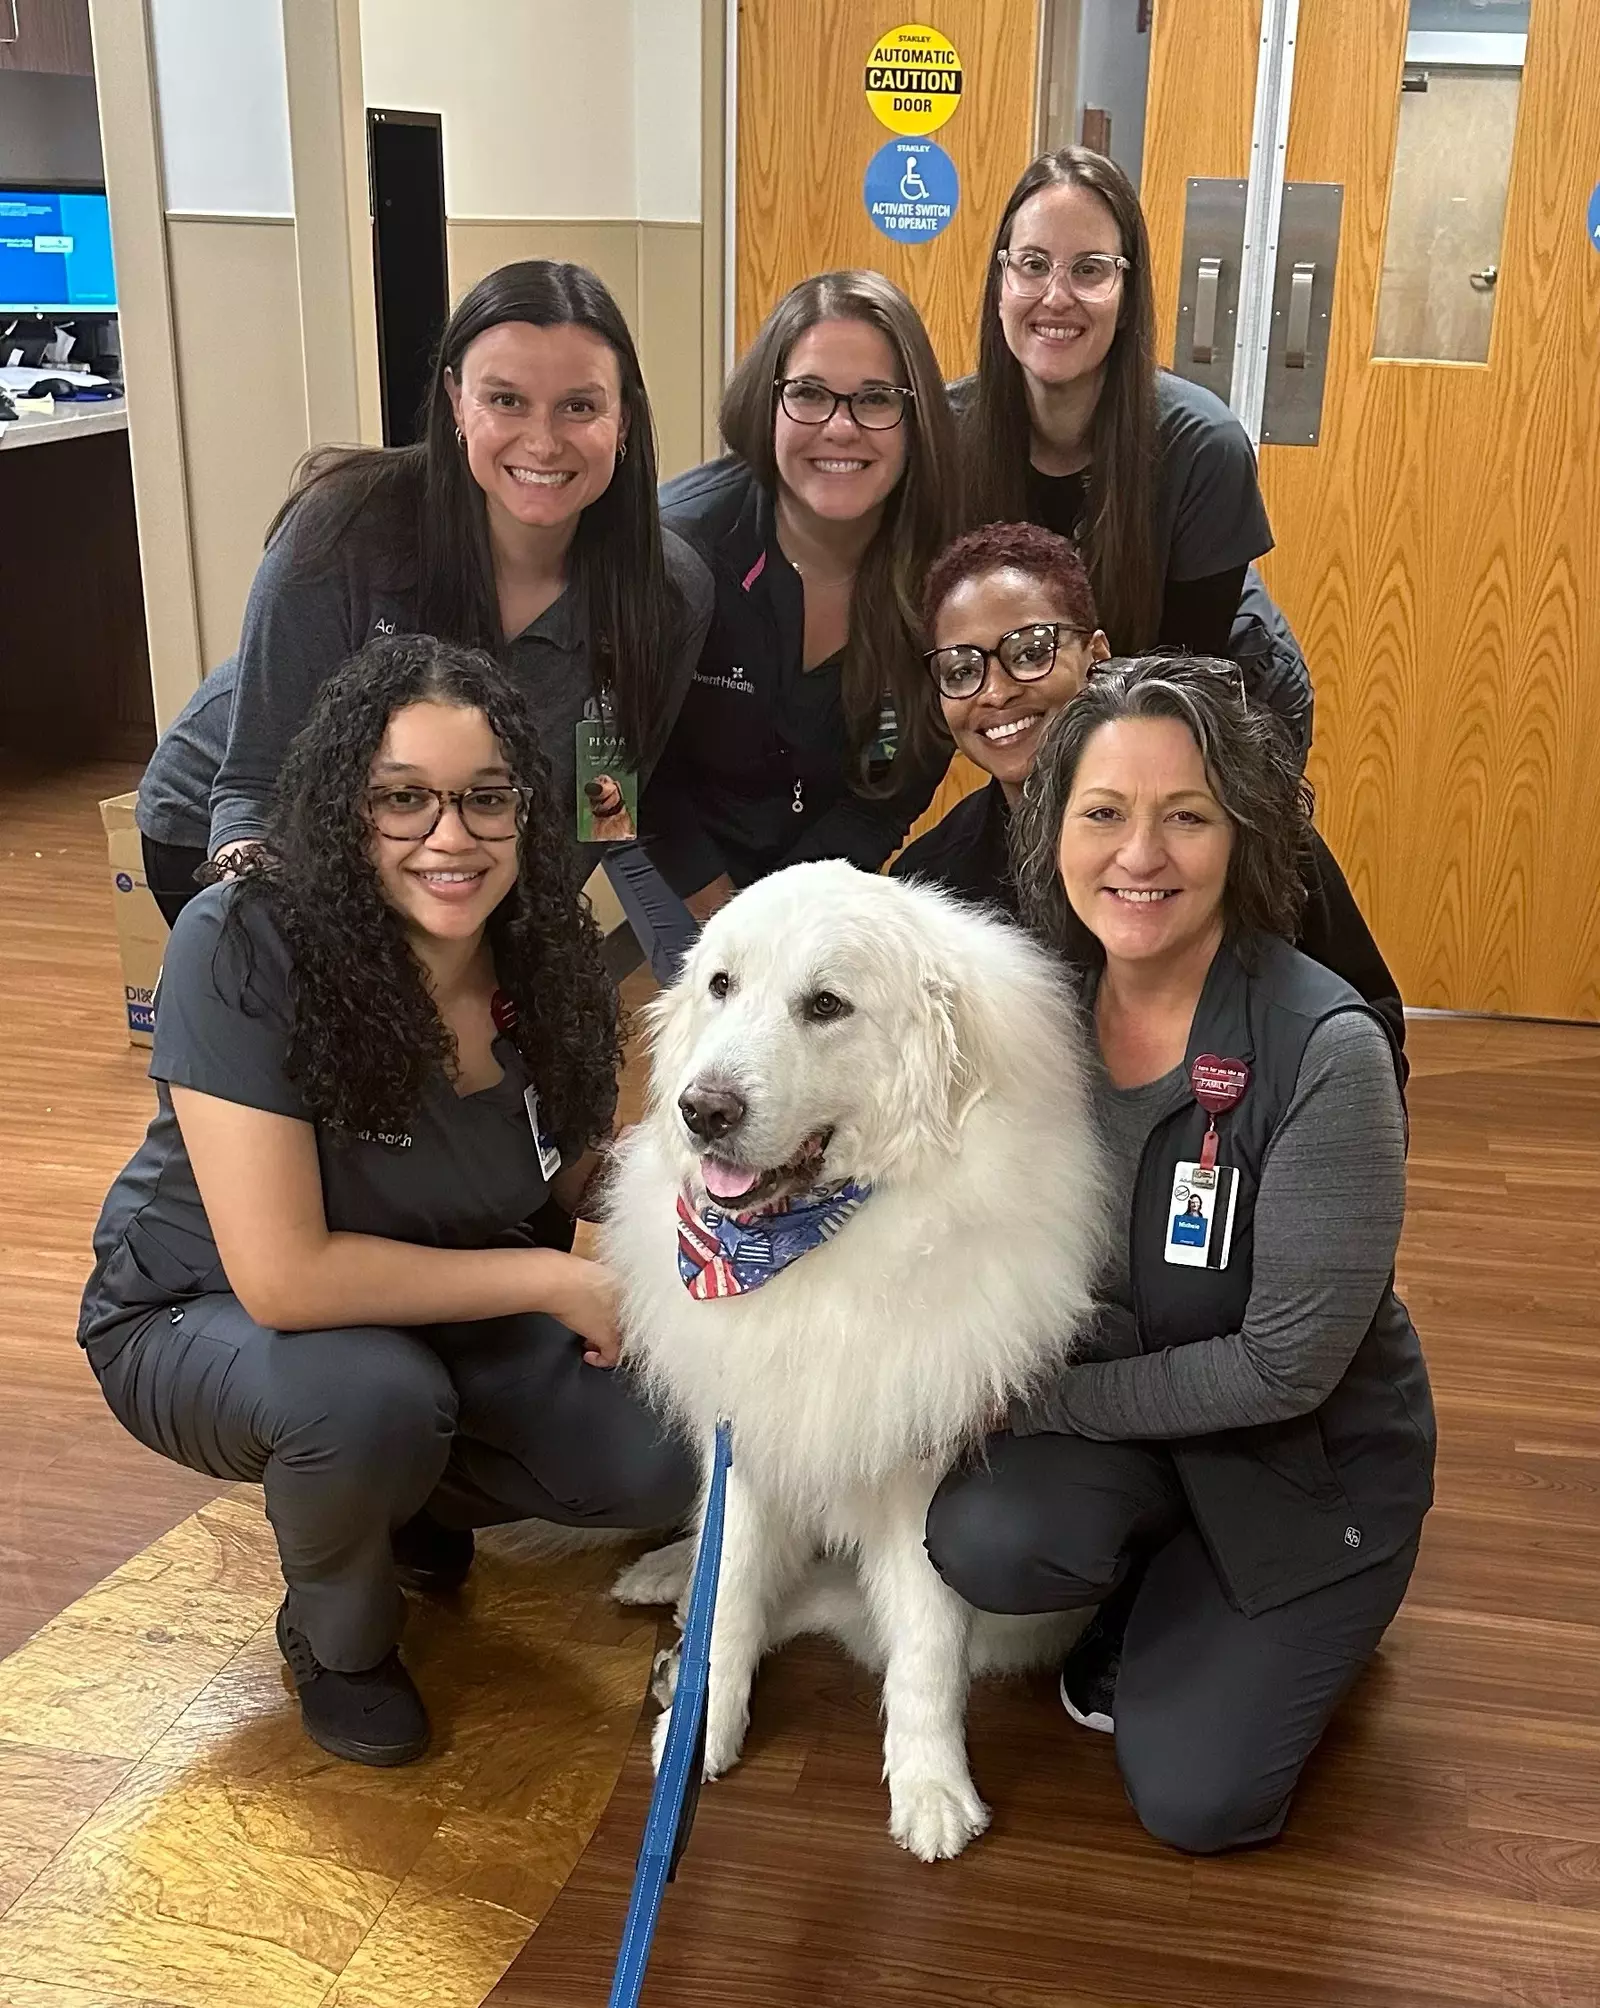 Pet therapy volunteer Duke McDreamy and AdventHealth team members.